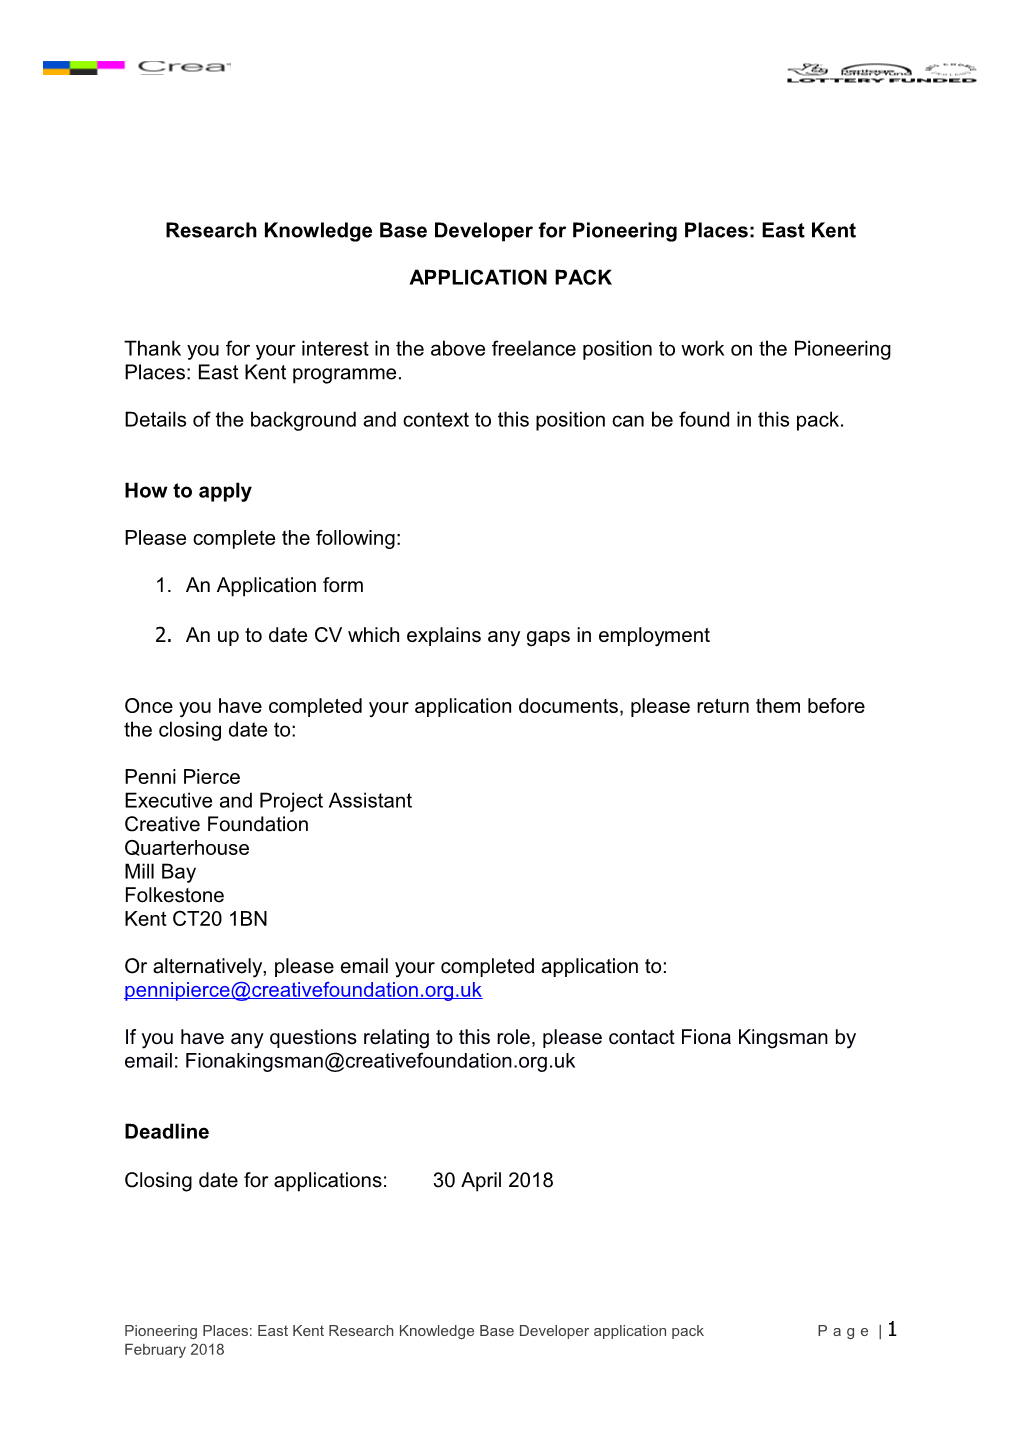 Research Knowledge Base Developer for Pioneering Places: East Kent